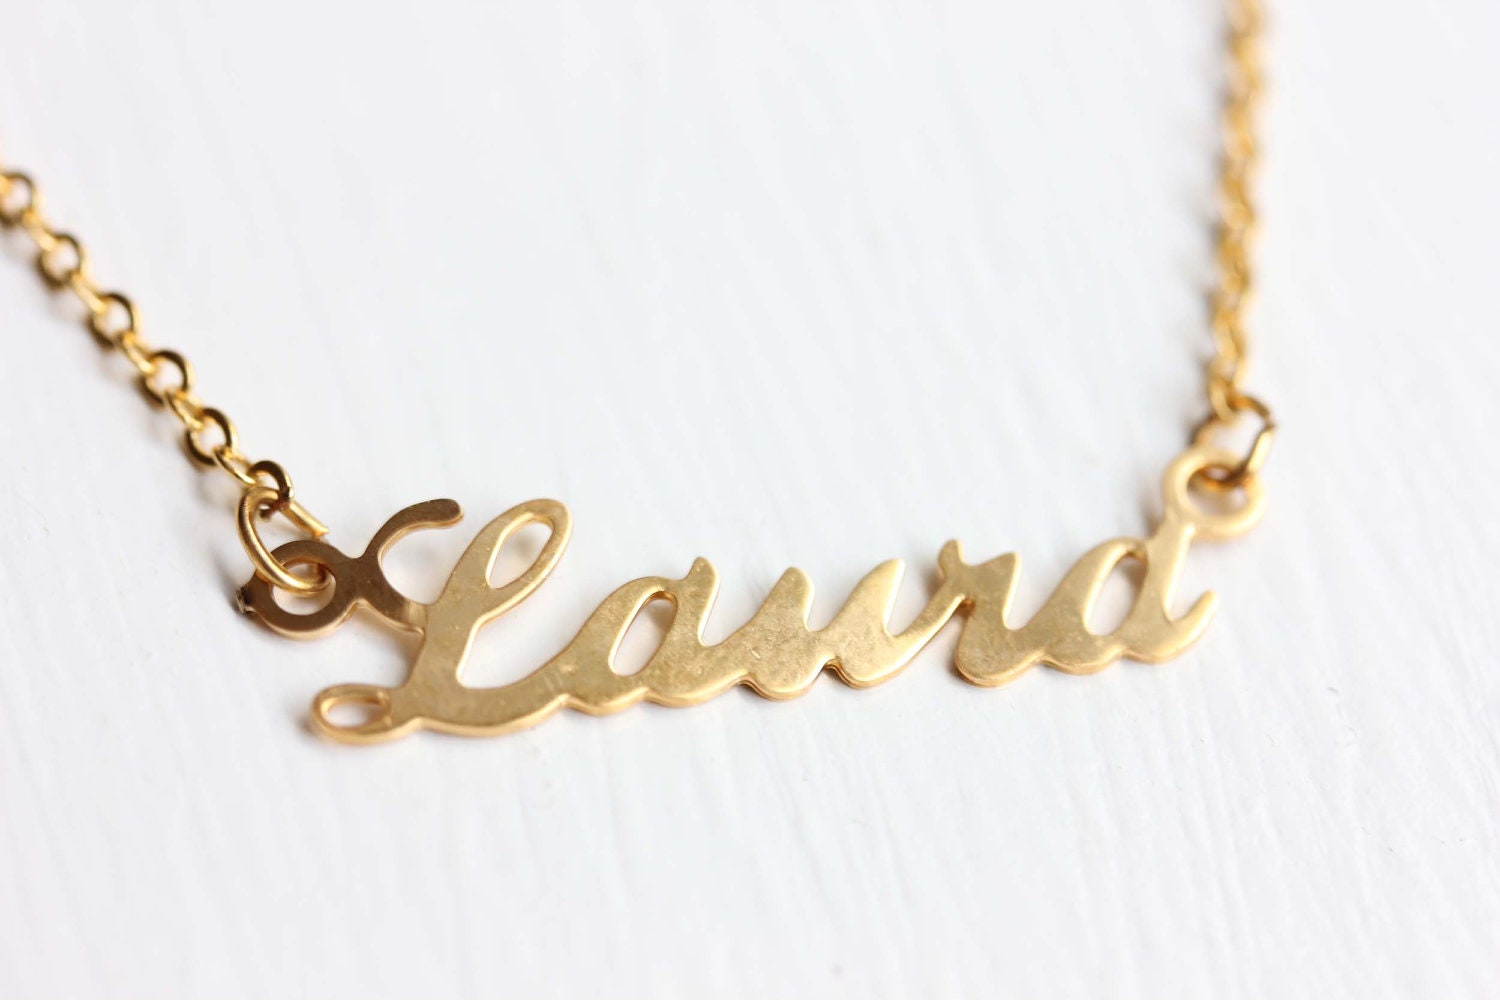  Laura  Name  Necklace Laura  Name  Jewelry  Name  Necklace Gold 